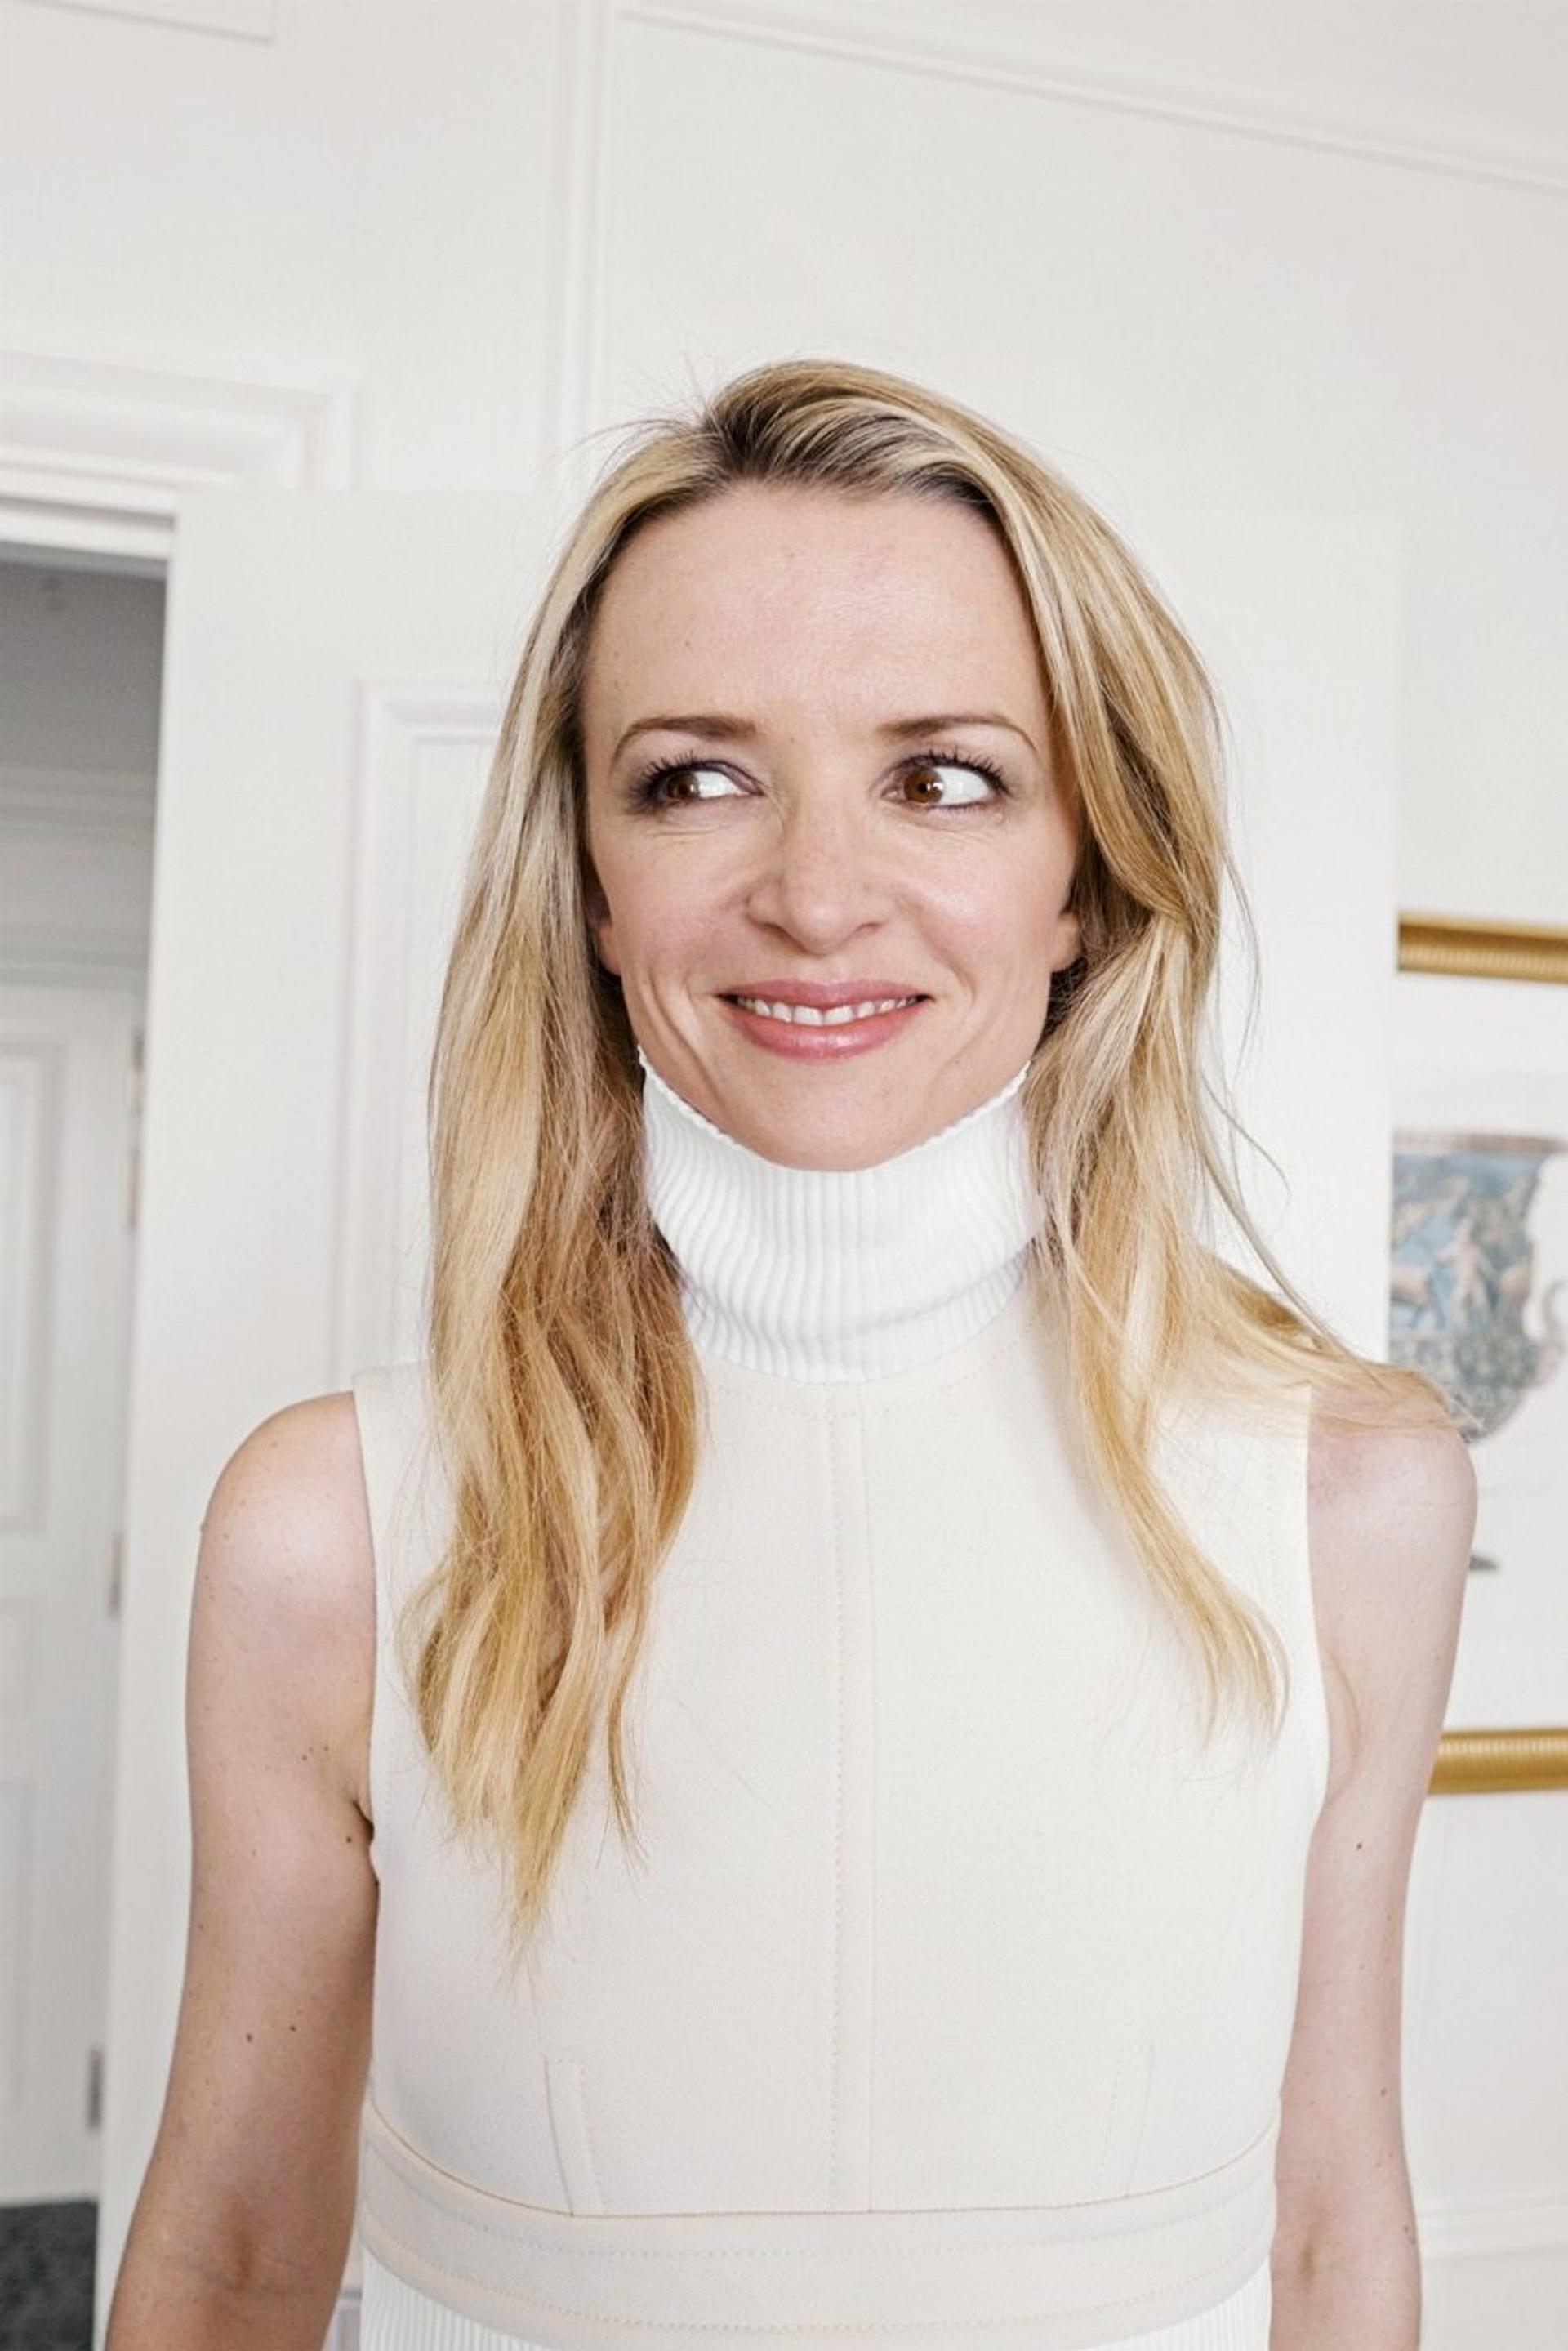 LVMH Vice President Delphine Arnault: “IT IS HARD TO REJECT FASHION”